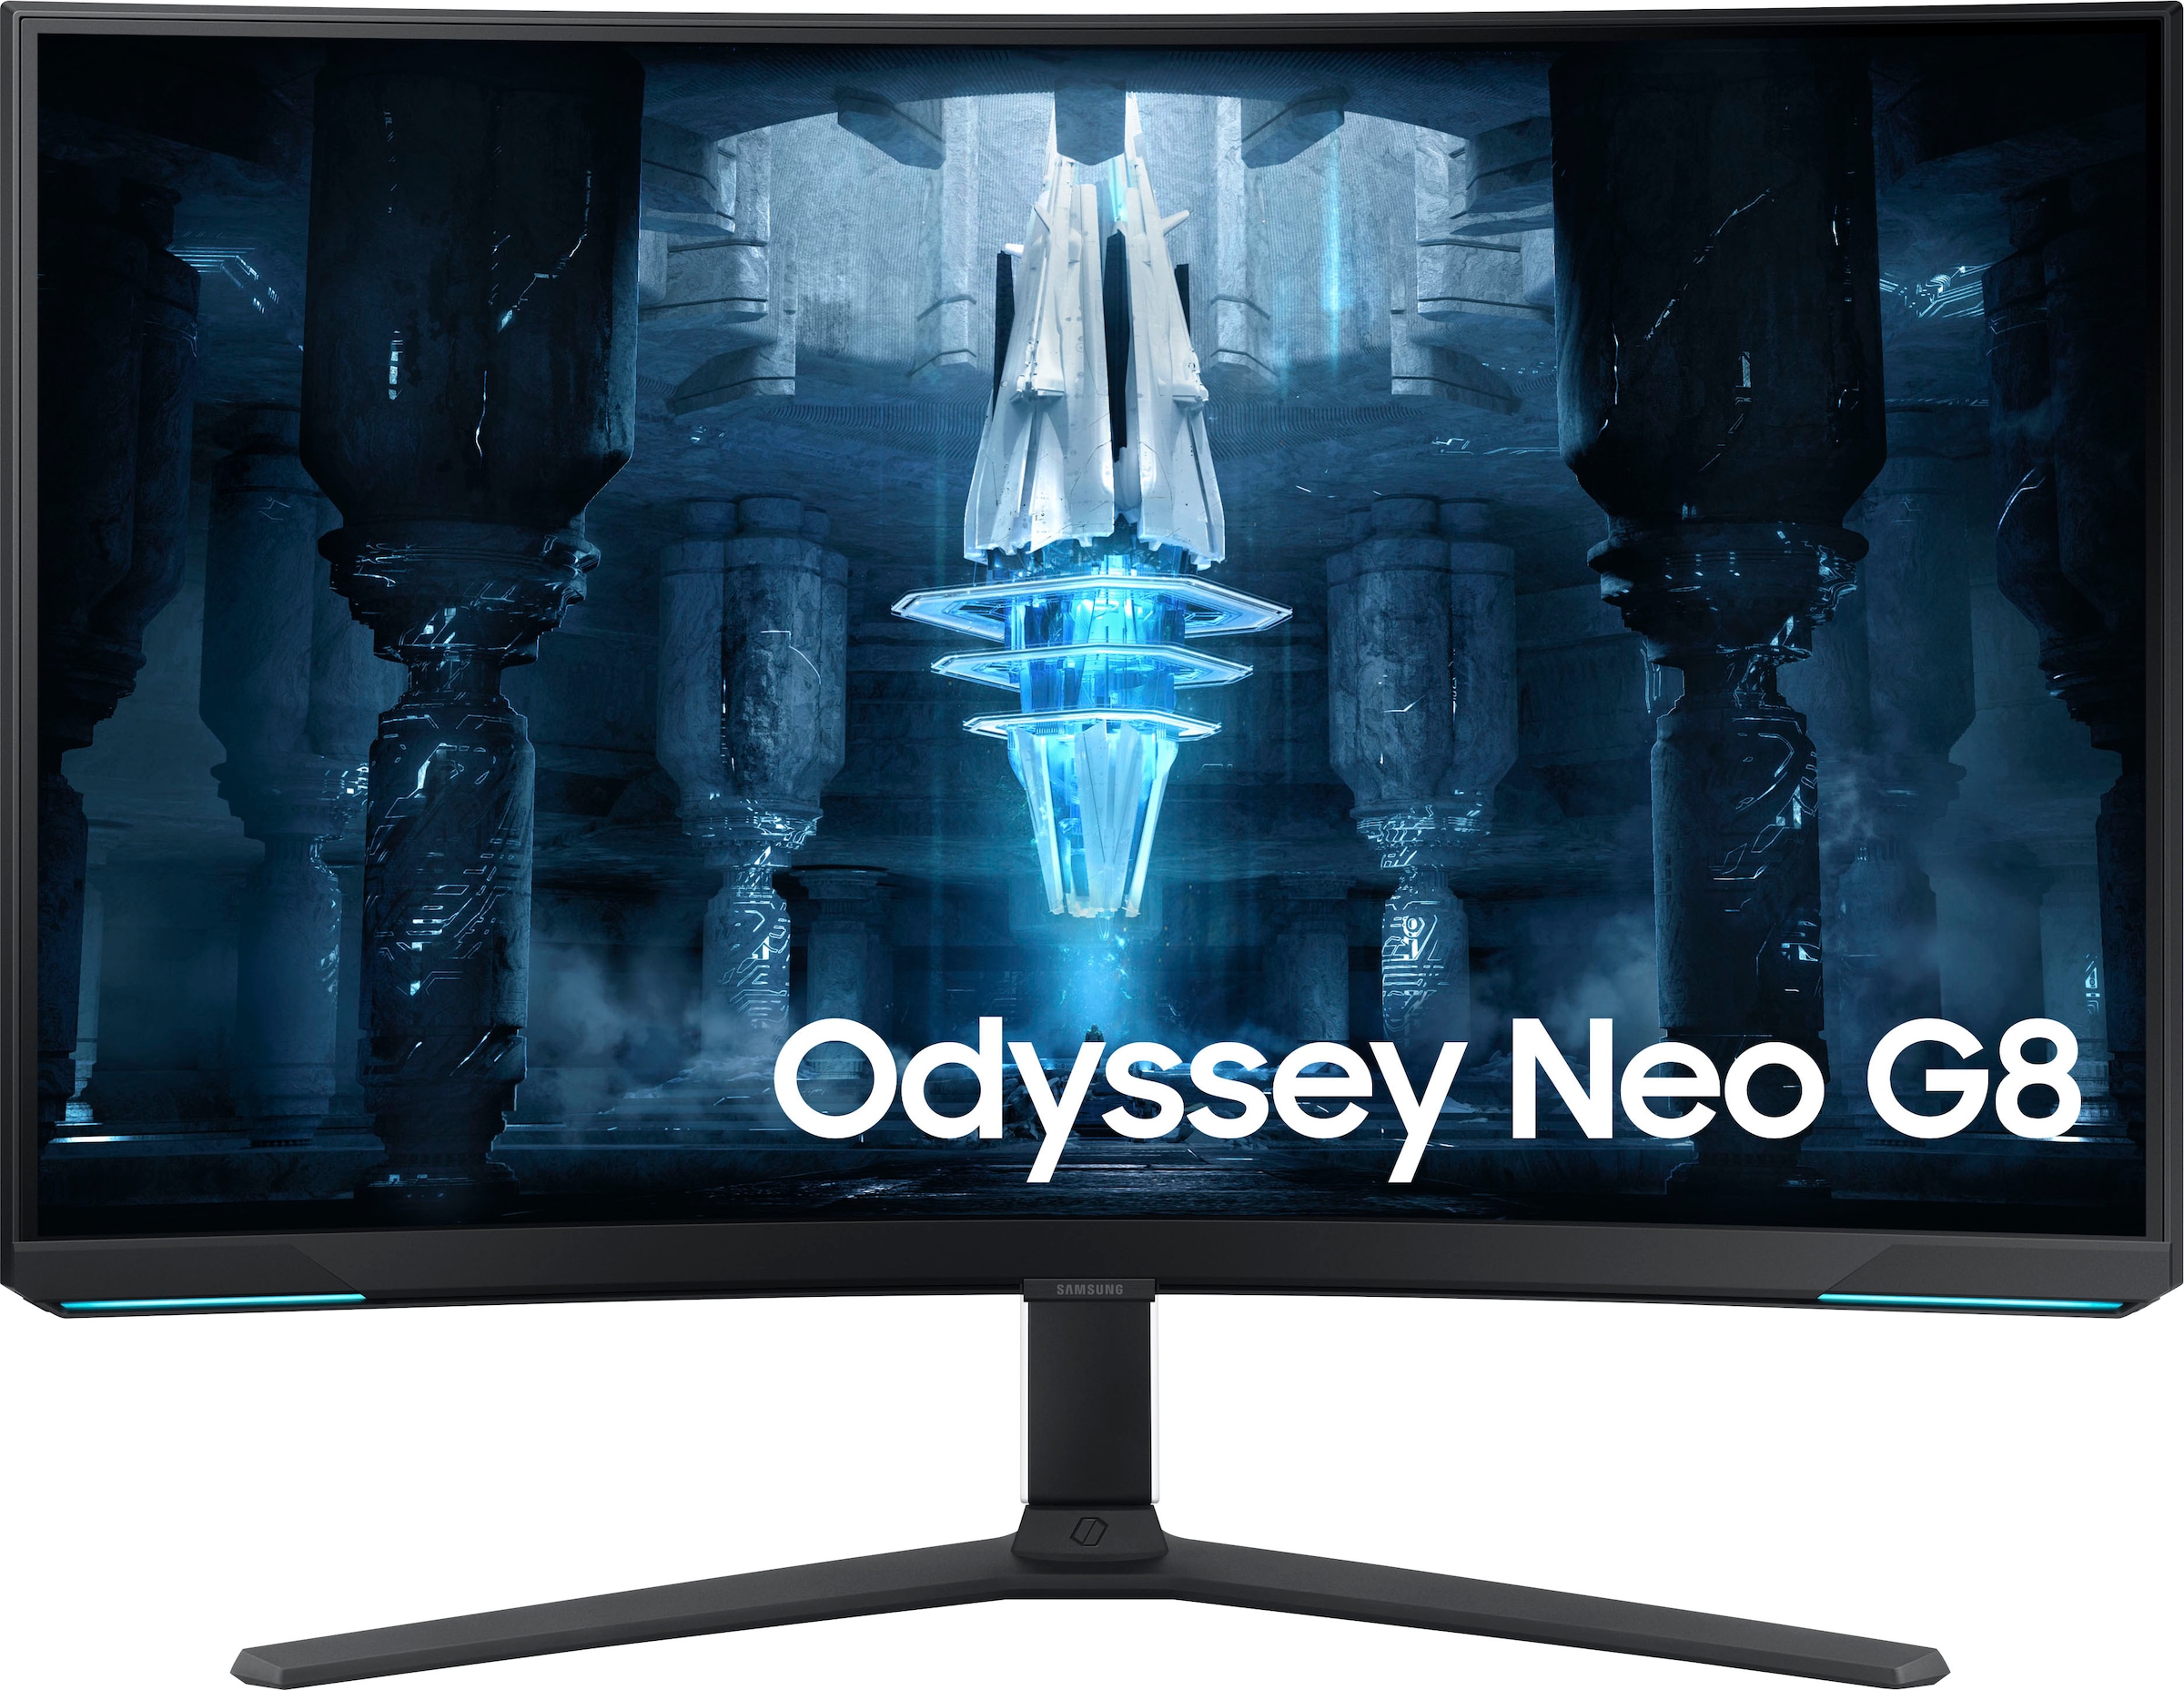 1ms 3840 Reaktionszeit, Zoll, px, bei HD, Curved-Gaming-LED-Monitor Neo ms 165 cm/32 1 (G/G) 81 4K S32BG850NP«, x 2160 »Odyssey OTTO Samsung G8 Ultra Hz,